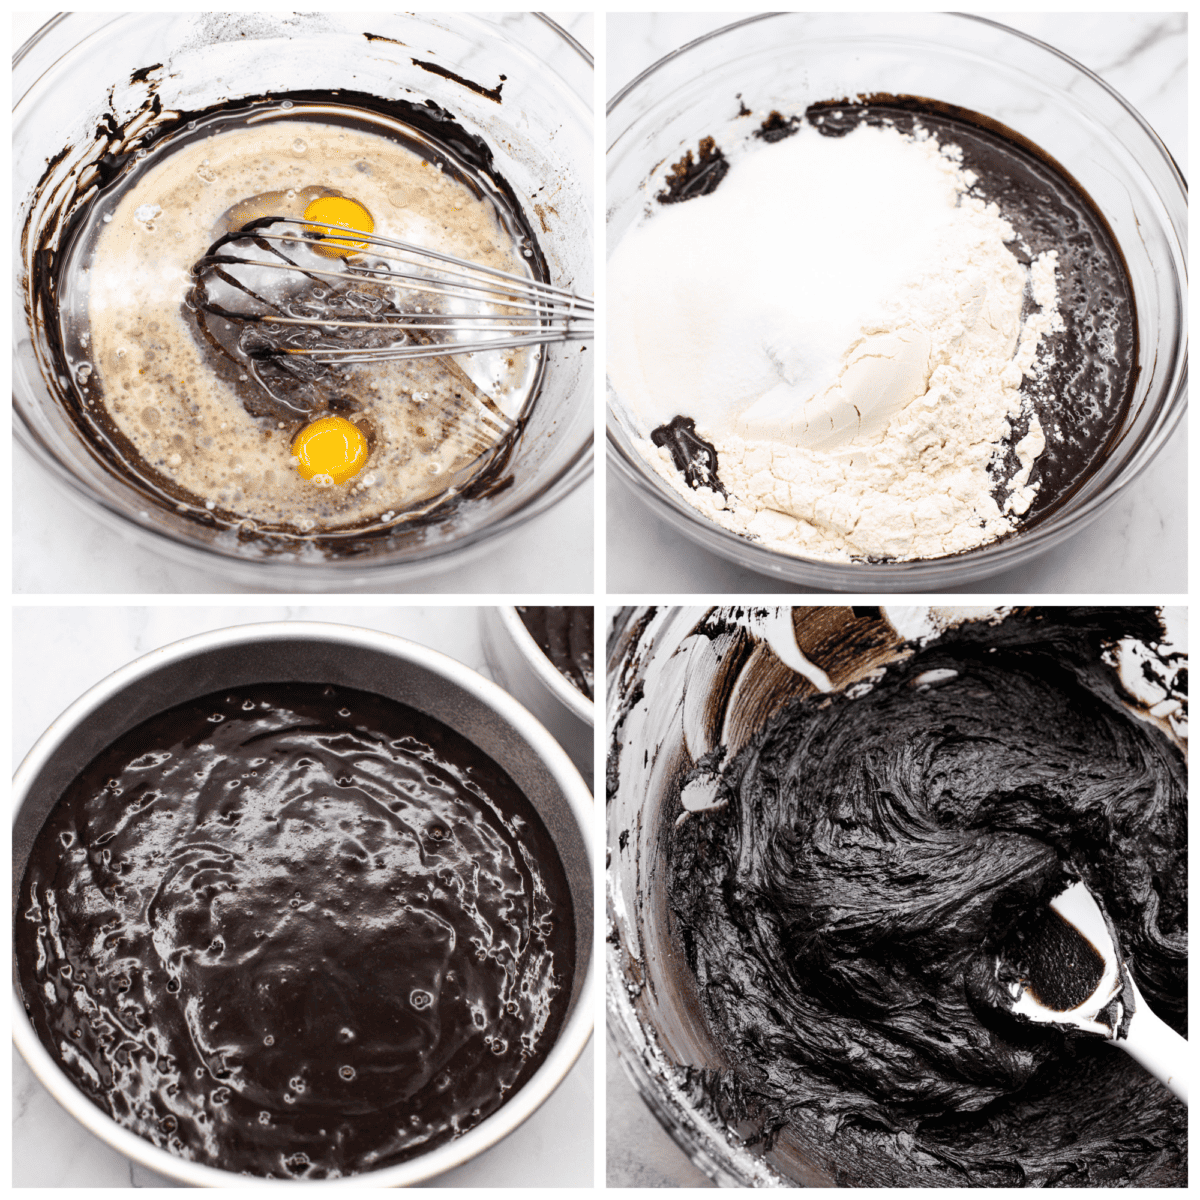 4-photo collage of the cake batter being mixed together.